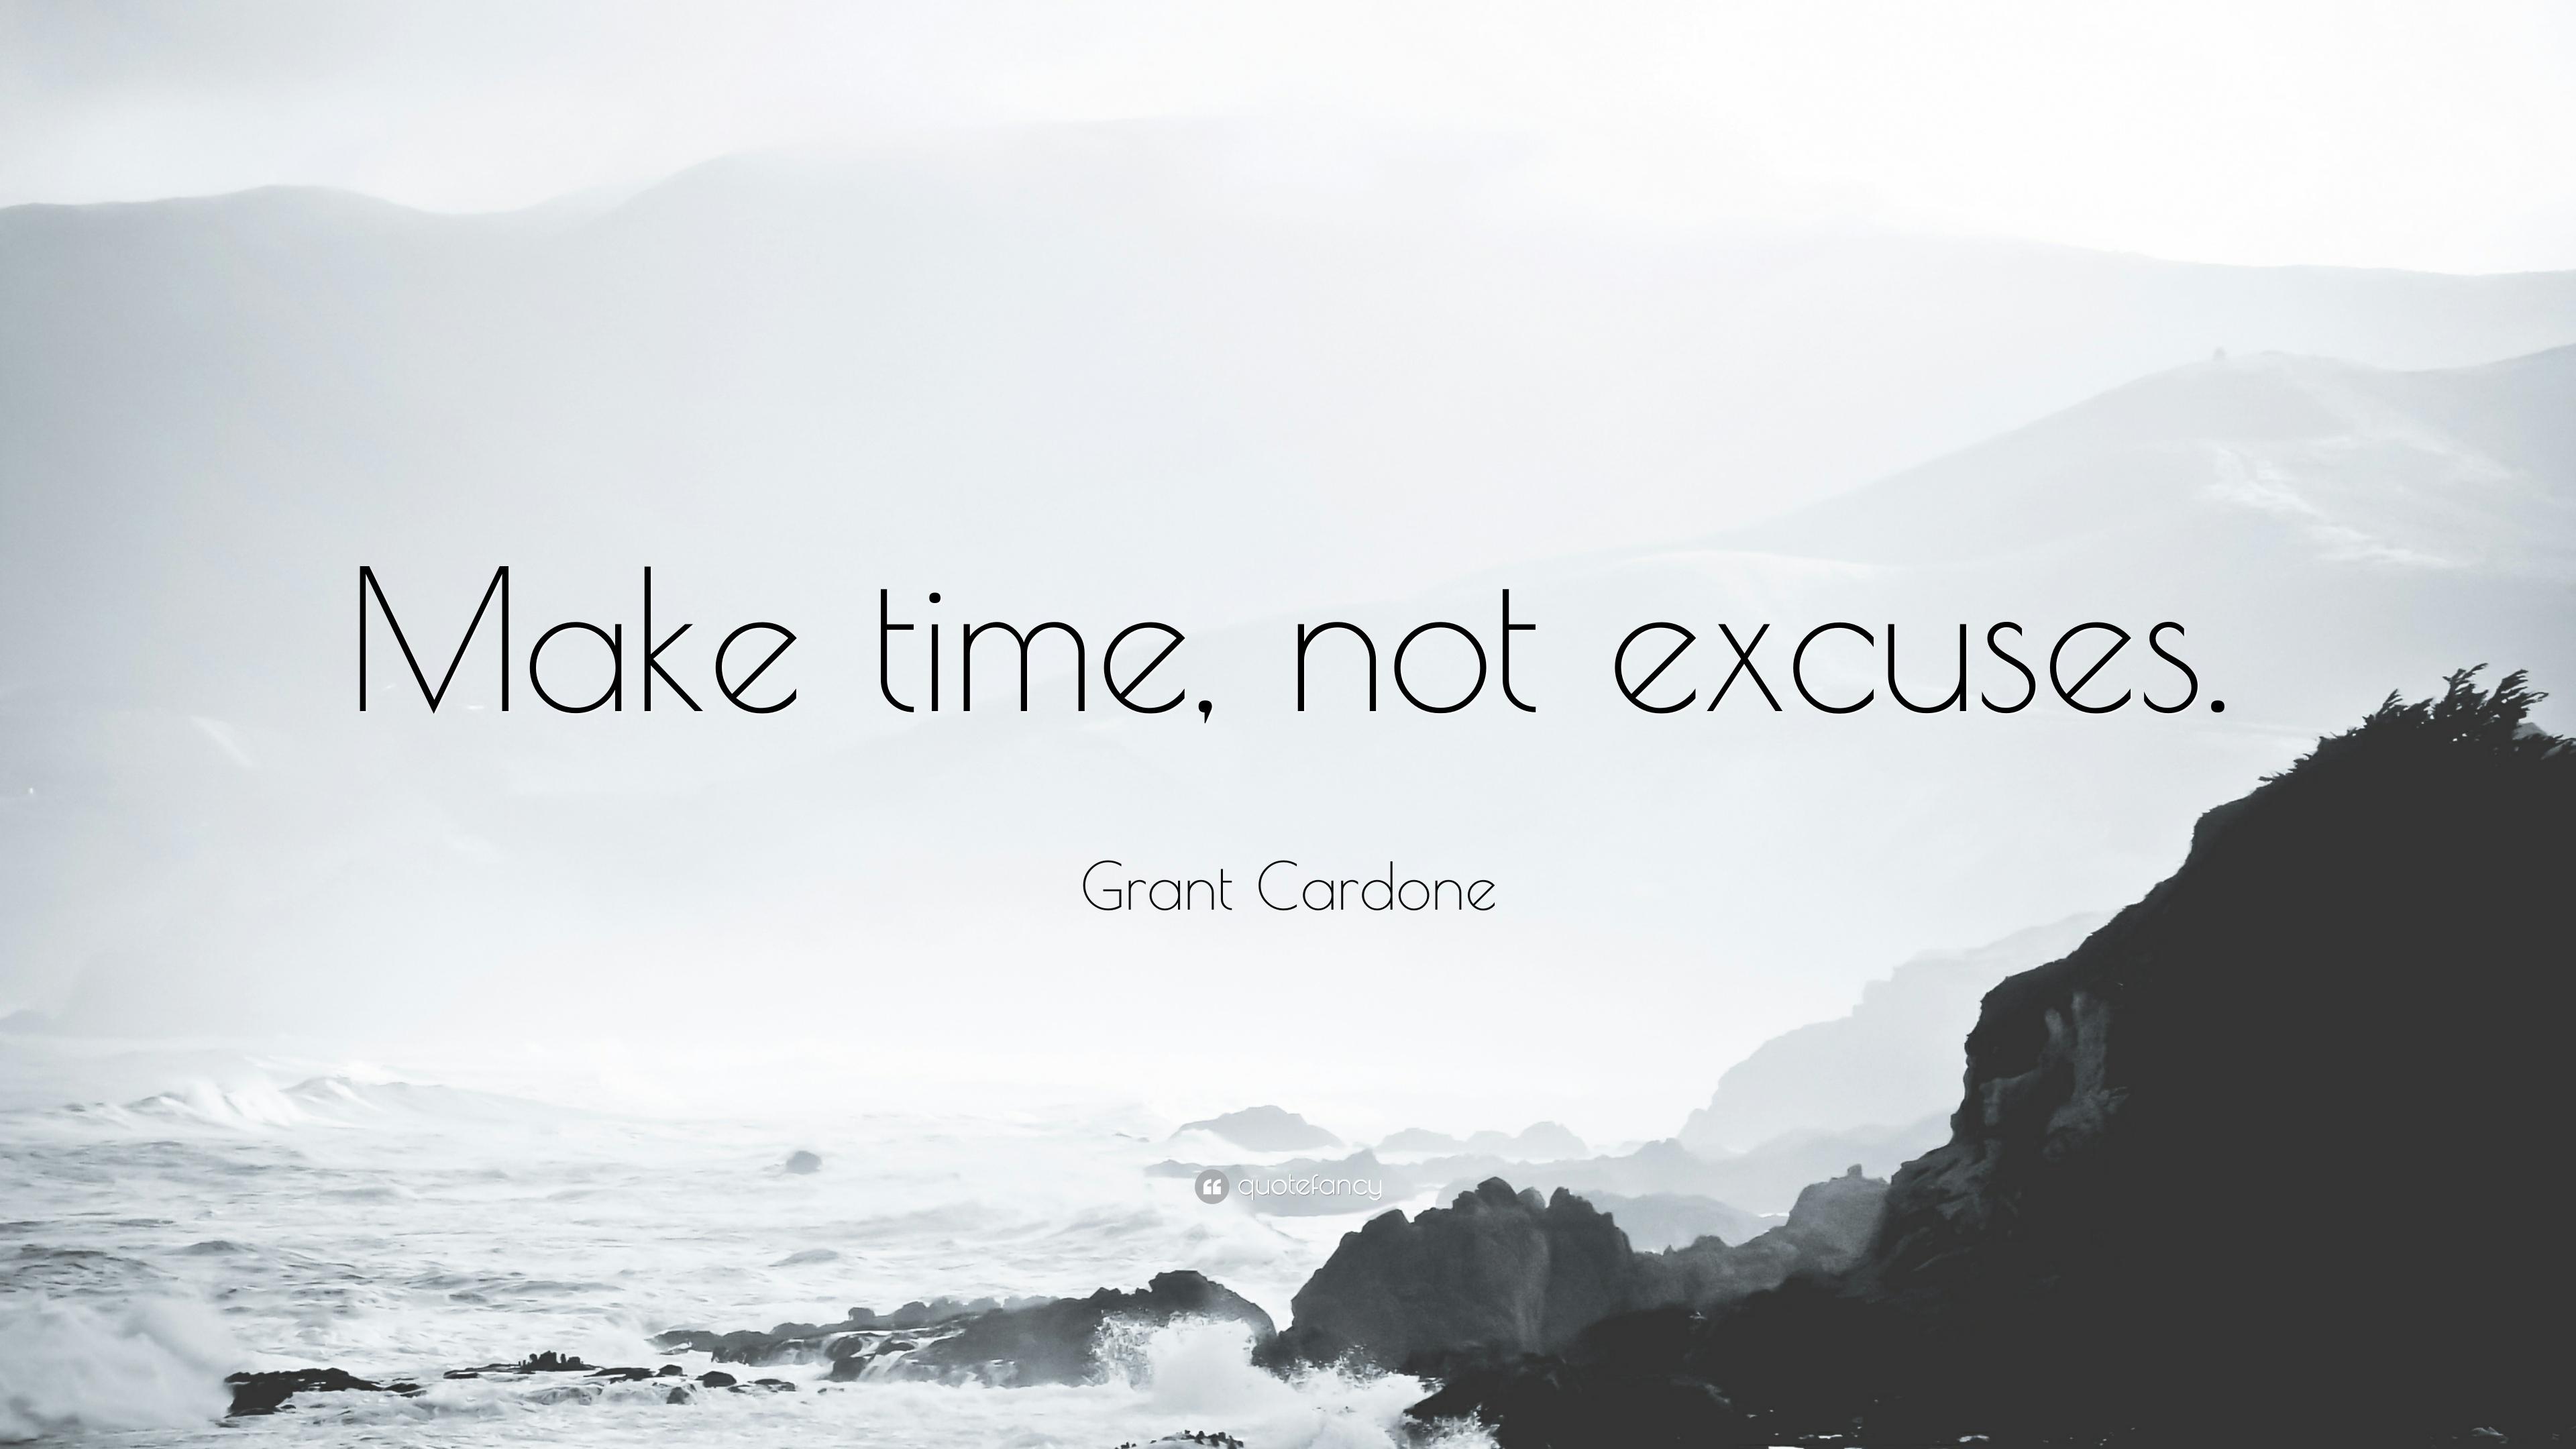 Grant Cardone Quote: "Make time, not excuses. 